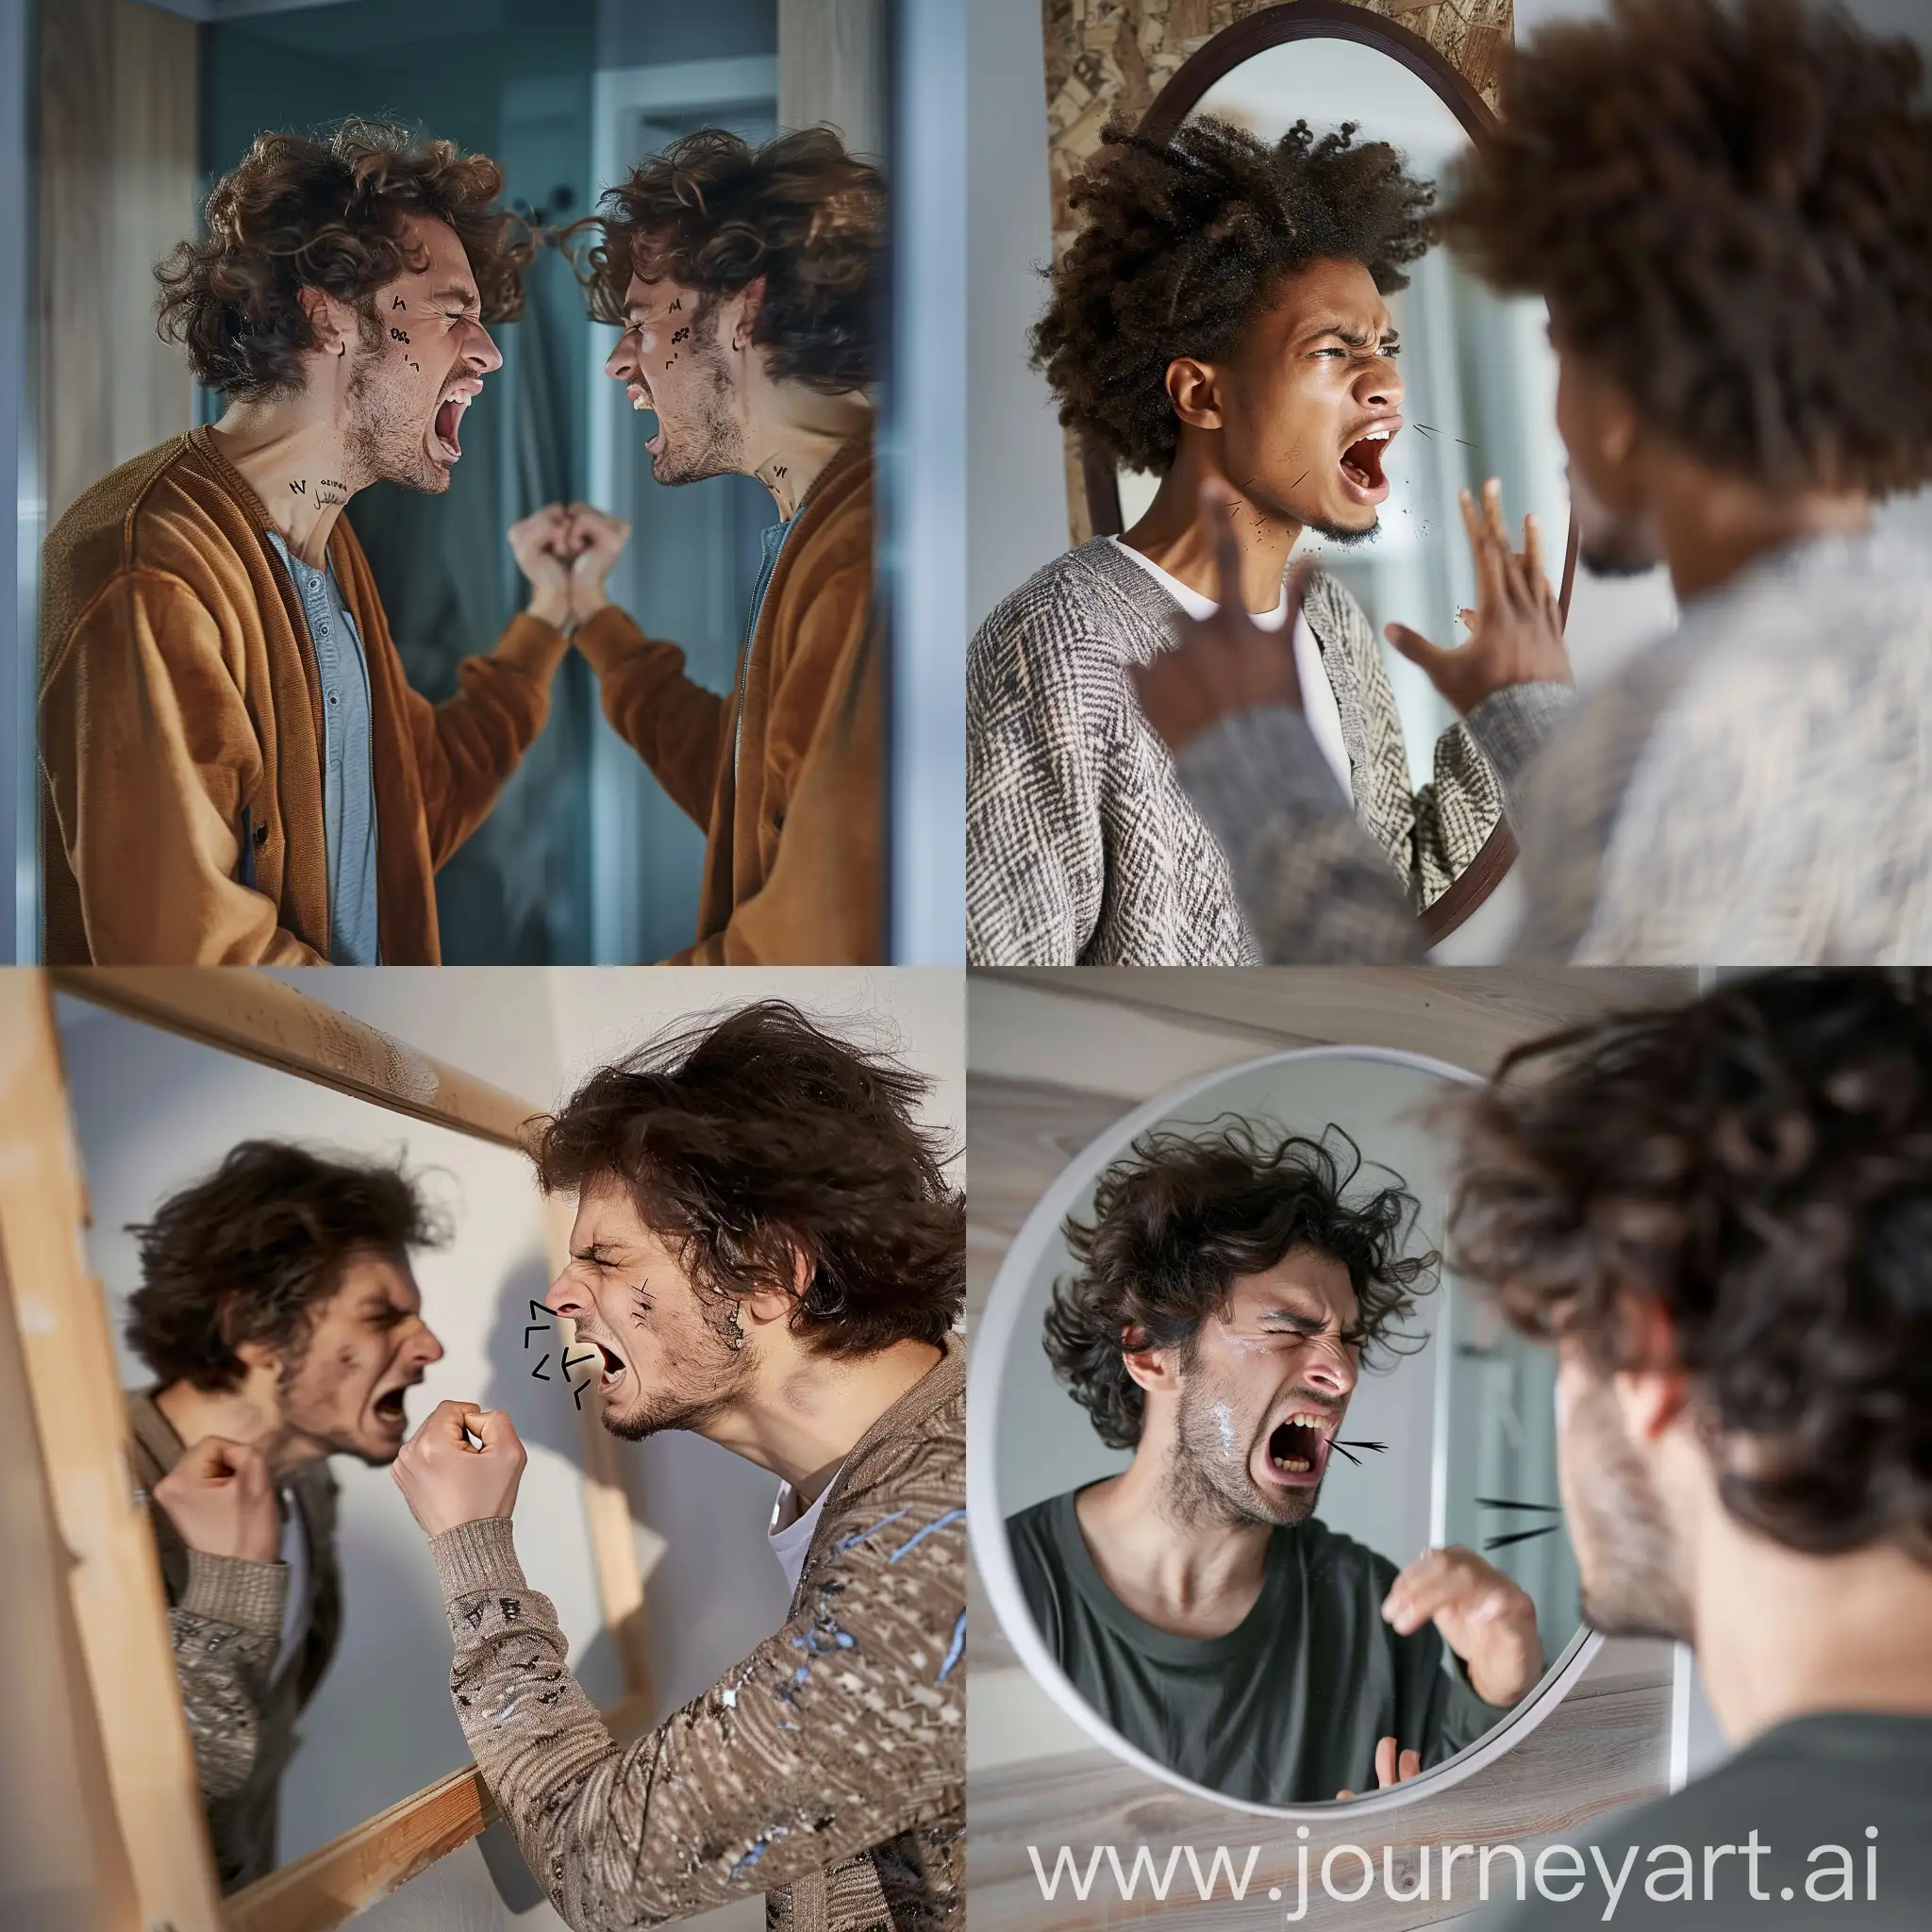 Frustrated-Man-Swearing-at-His-Reflection-in-the-Mirror